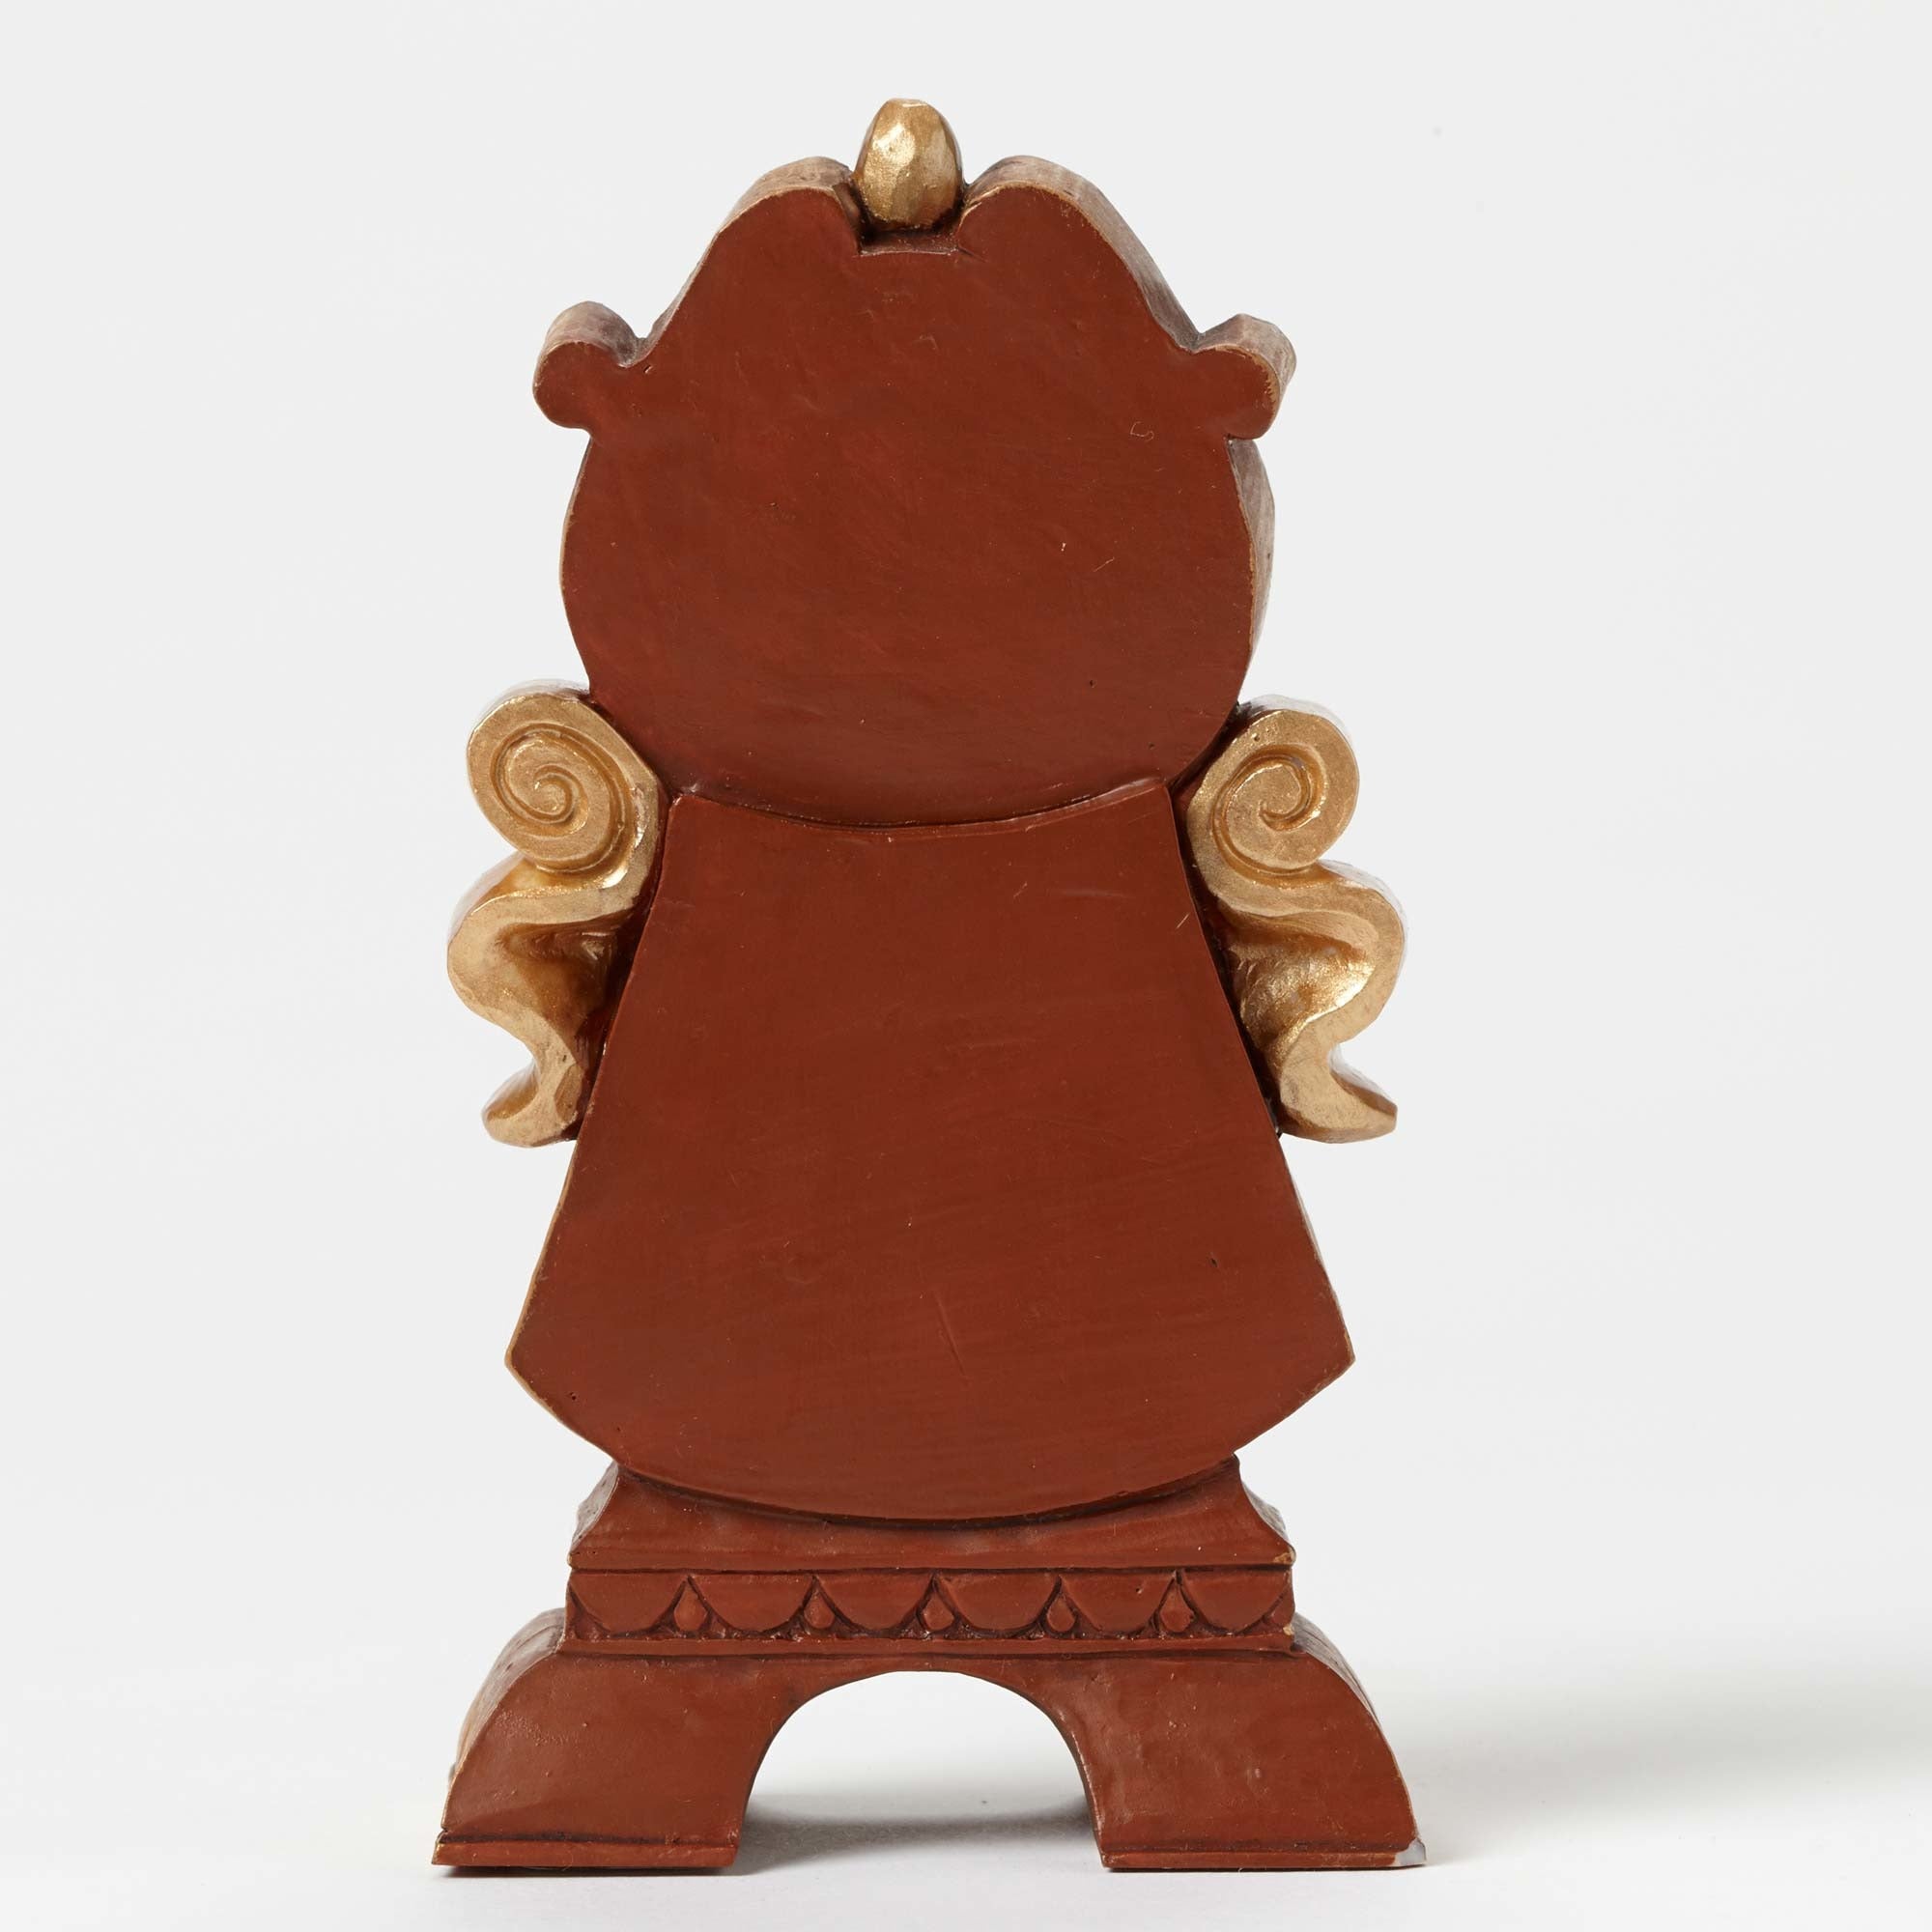 Beauty And The Beast - Cogsworth Figurine